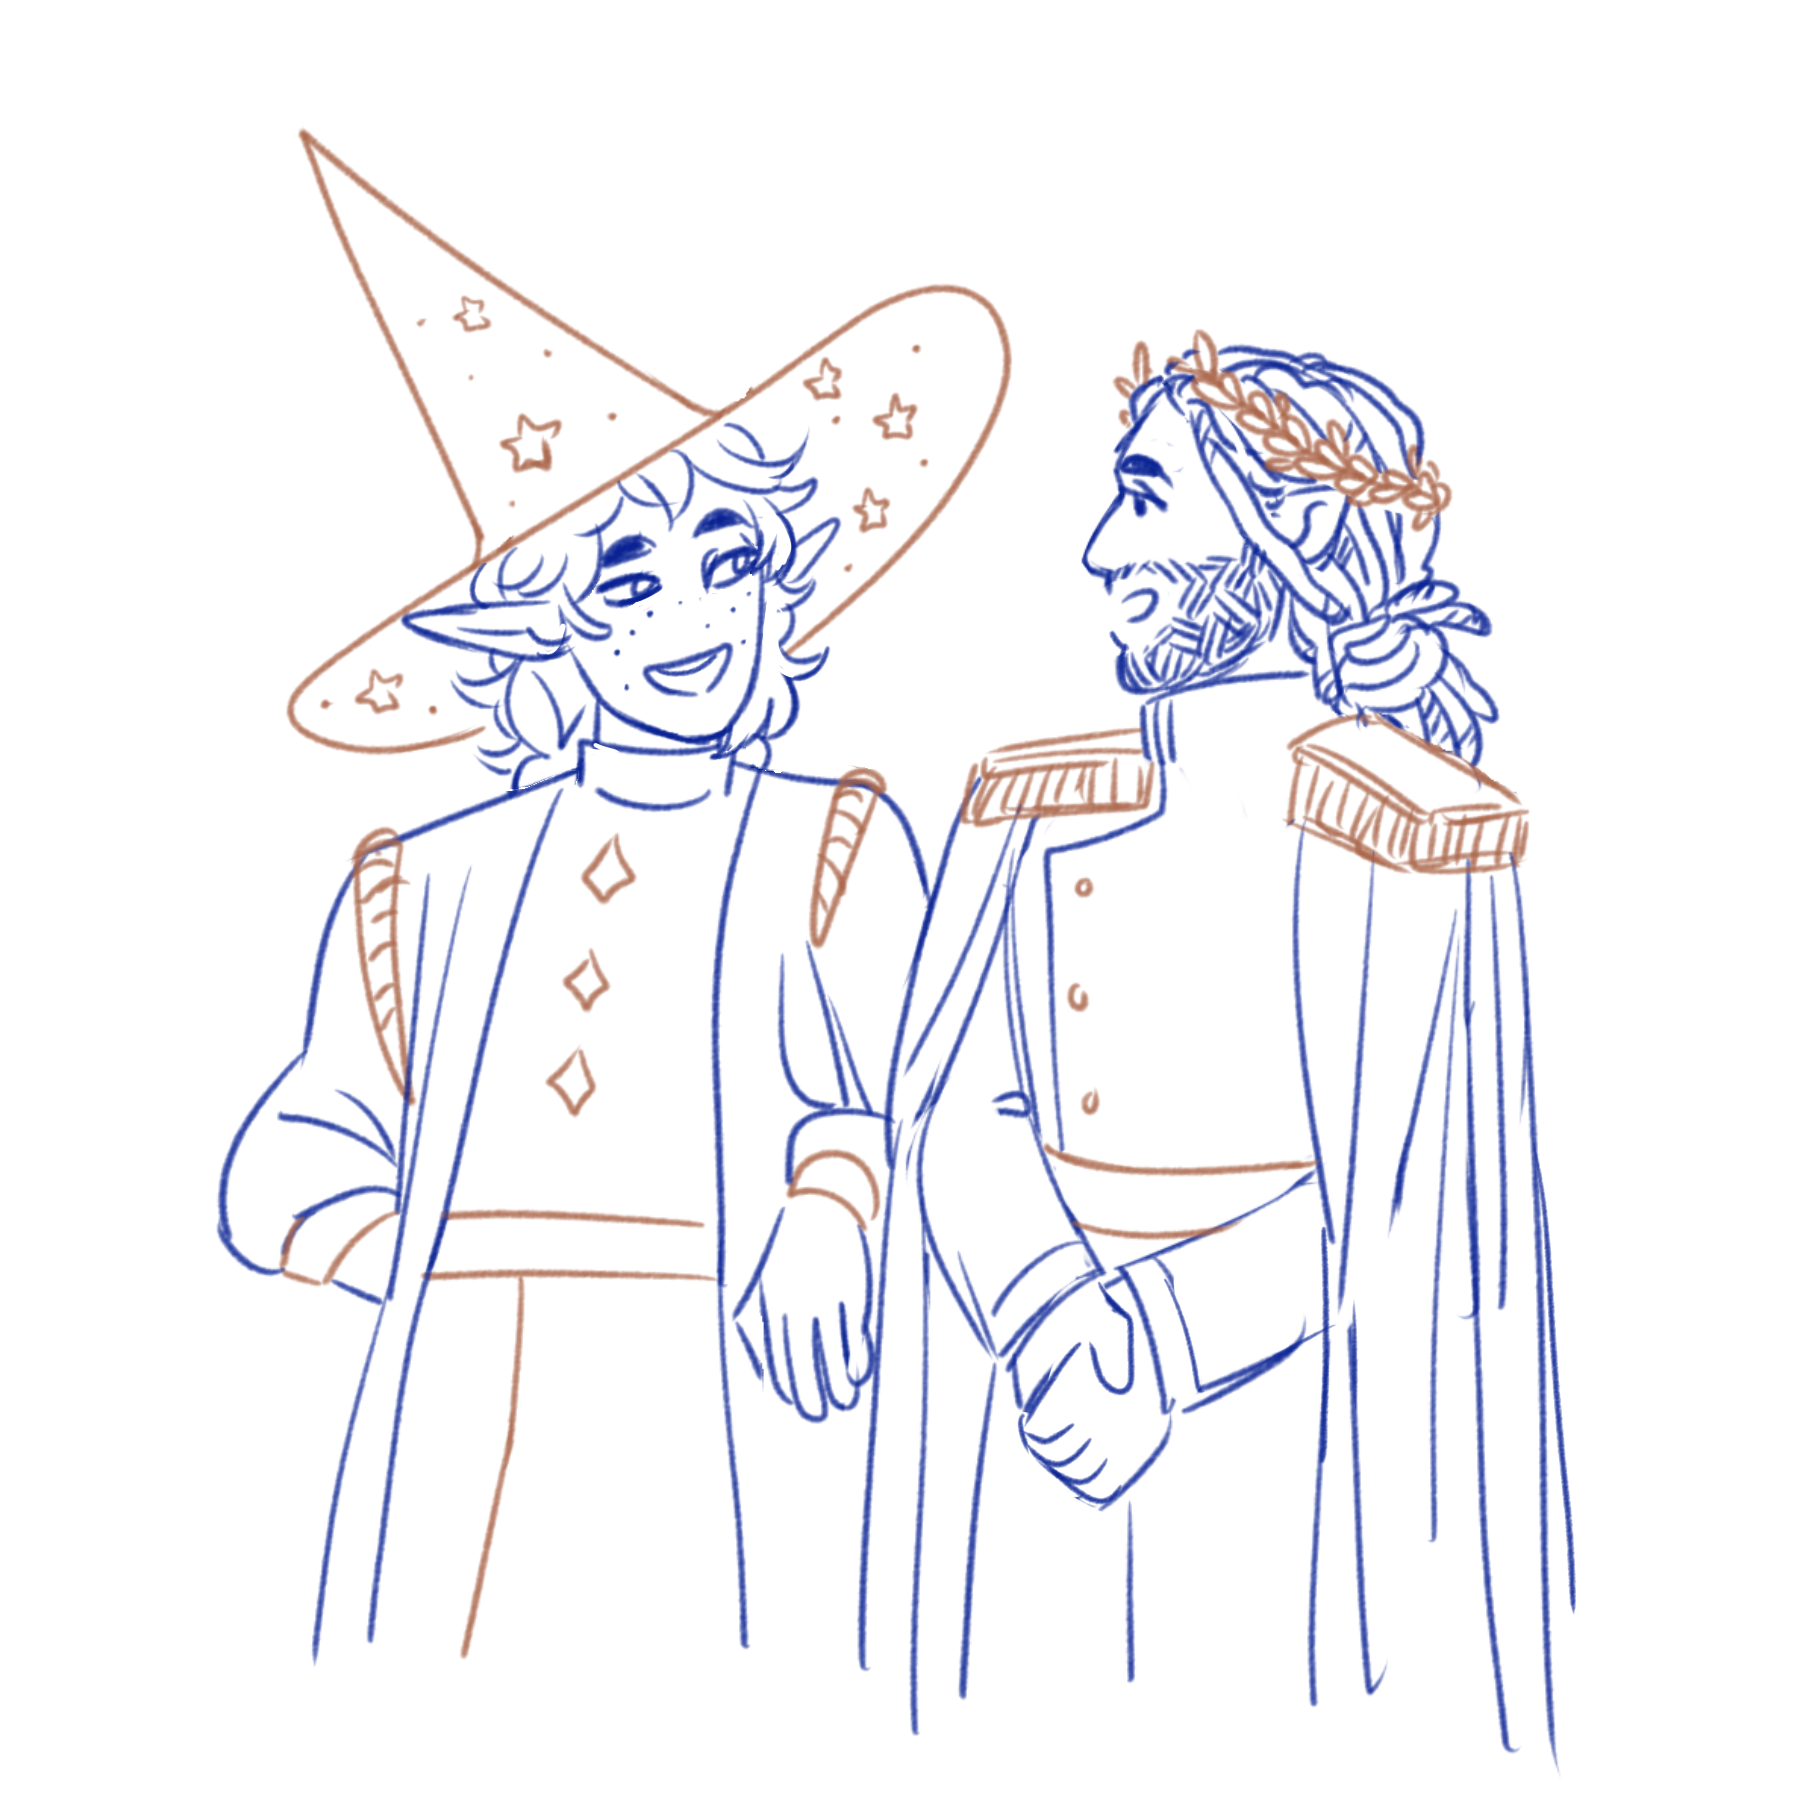 herbgerblin:[ID: Three lineart drawings in blue and gold. The first image shows Lup and Taako, a female and male elf respectively. They both have freckles and curly hair. Lup is wearing a dress and apron, while taako wears a wizard hat and robes covered